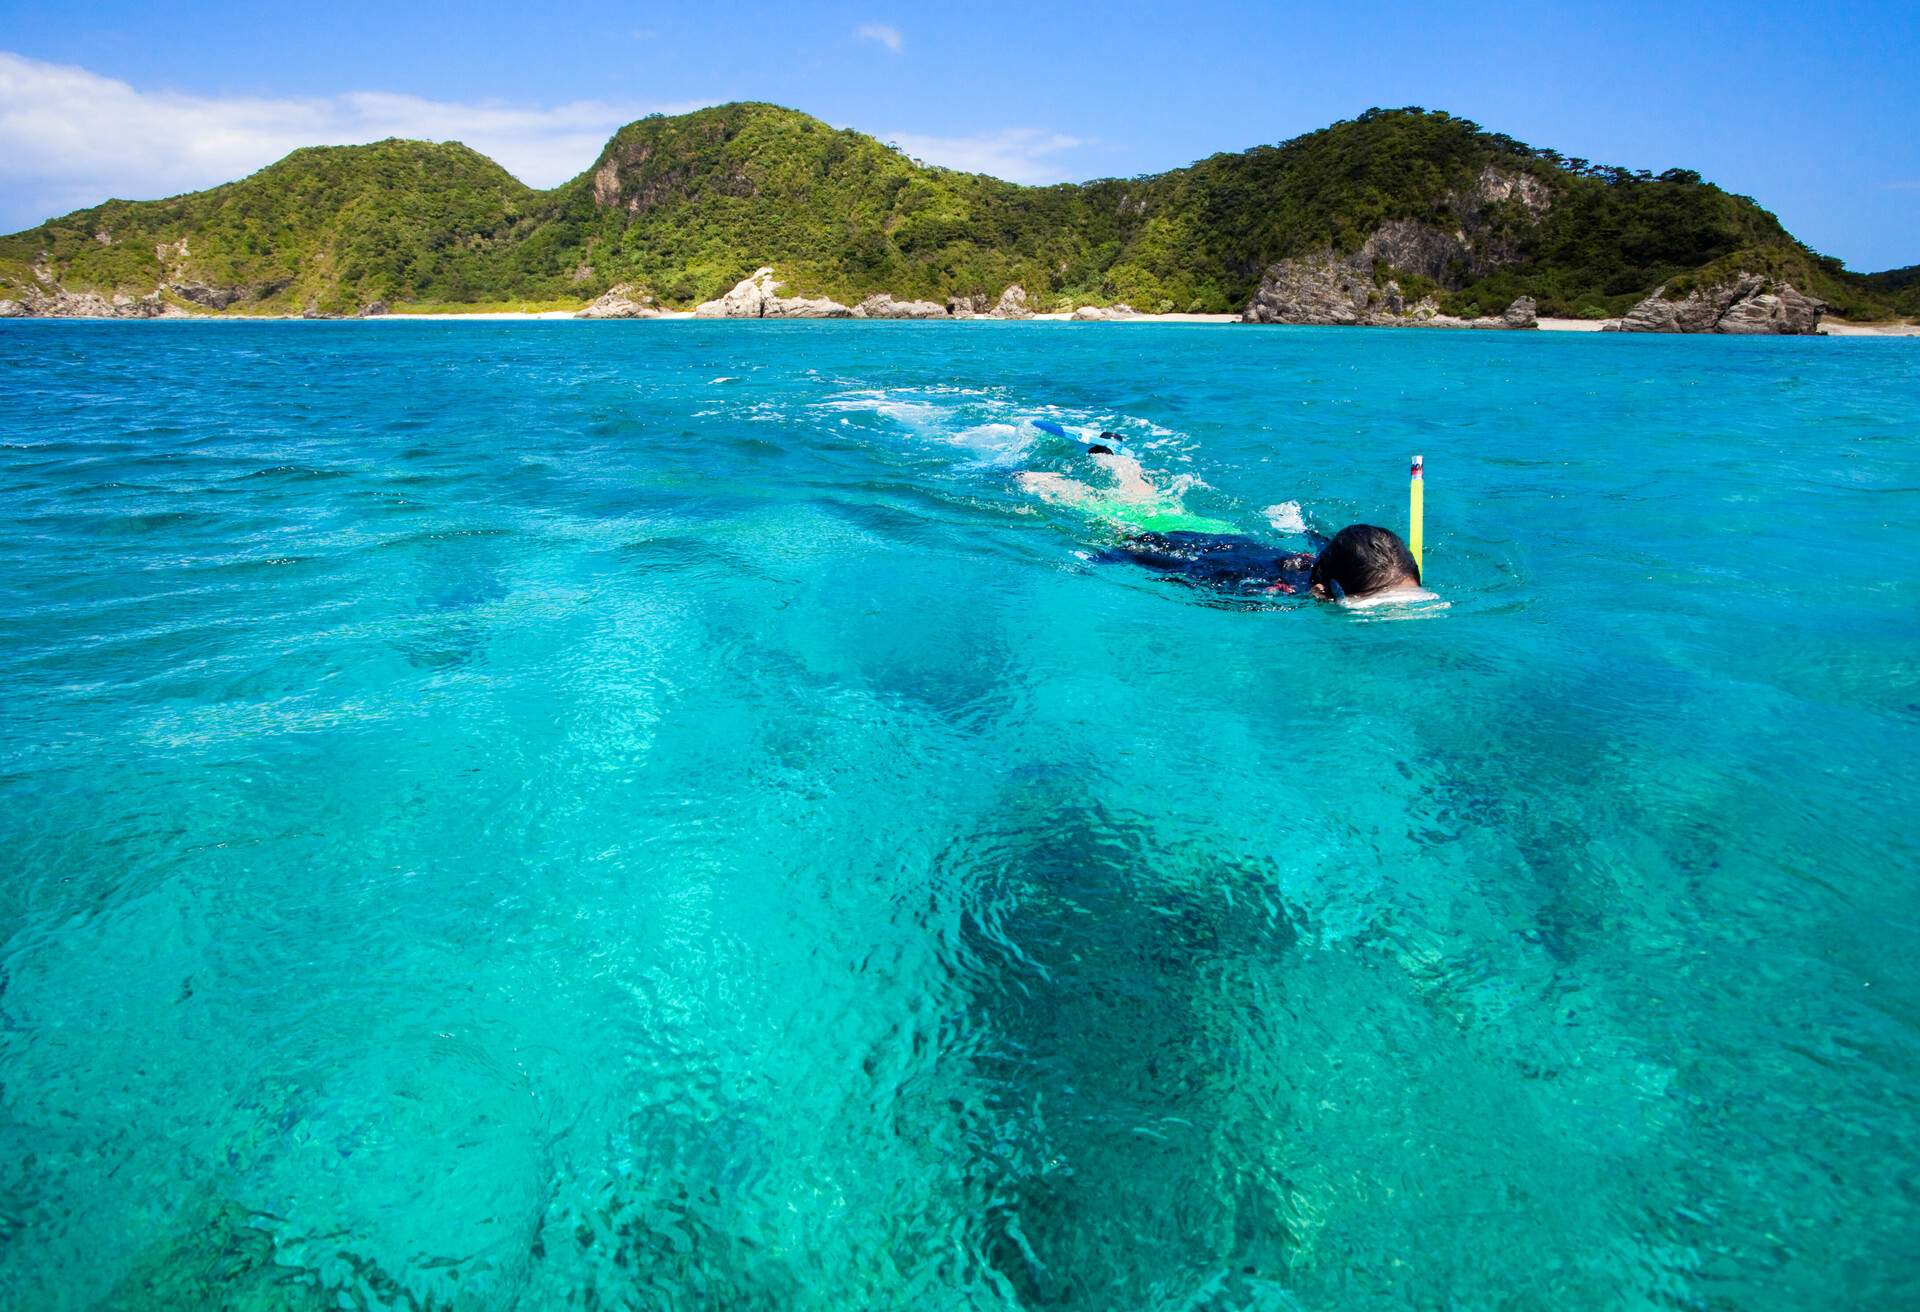 A person snorkelling in the blue water sea near the lush forested island.